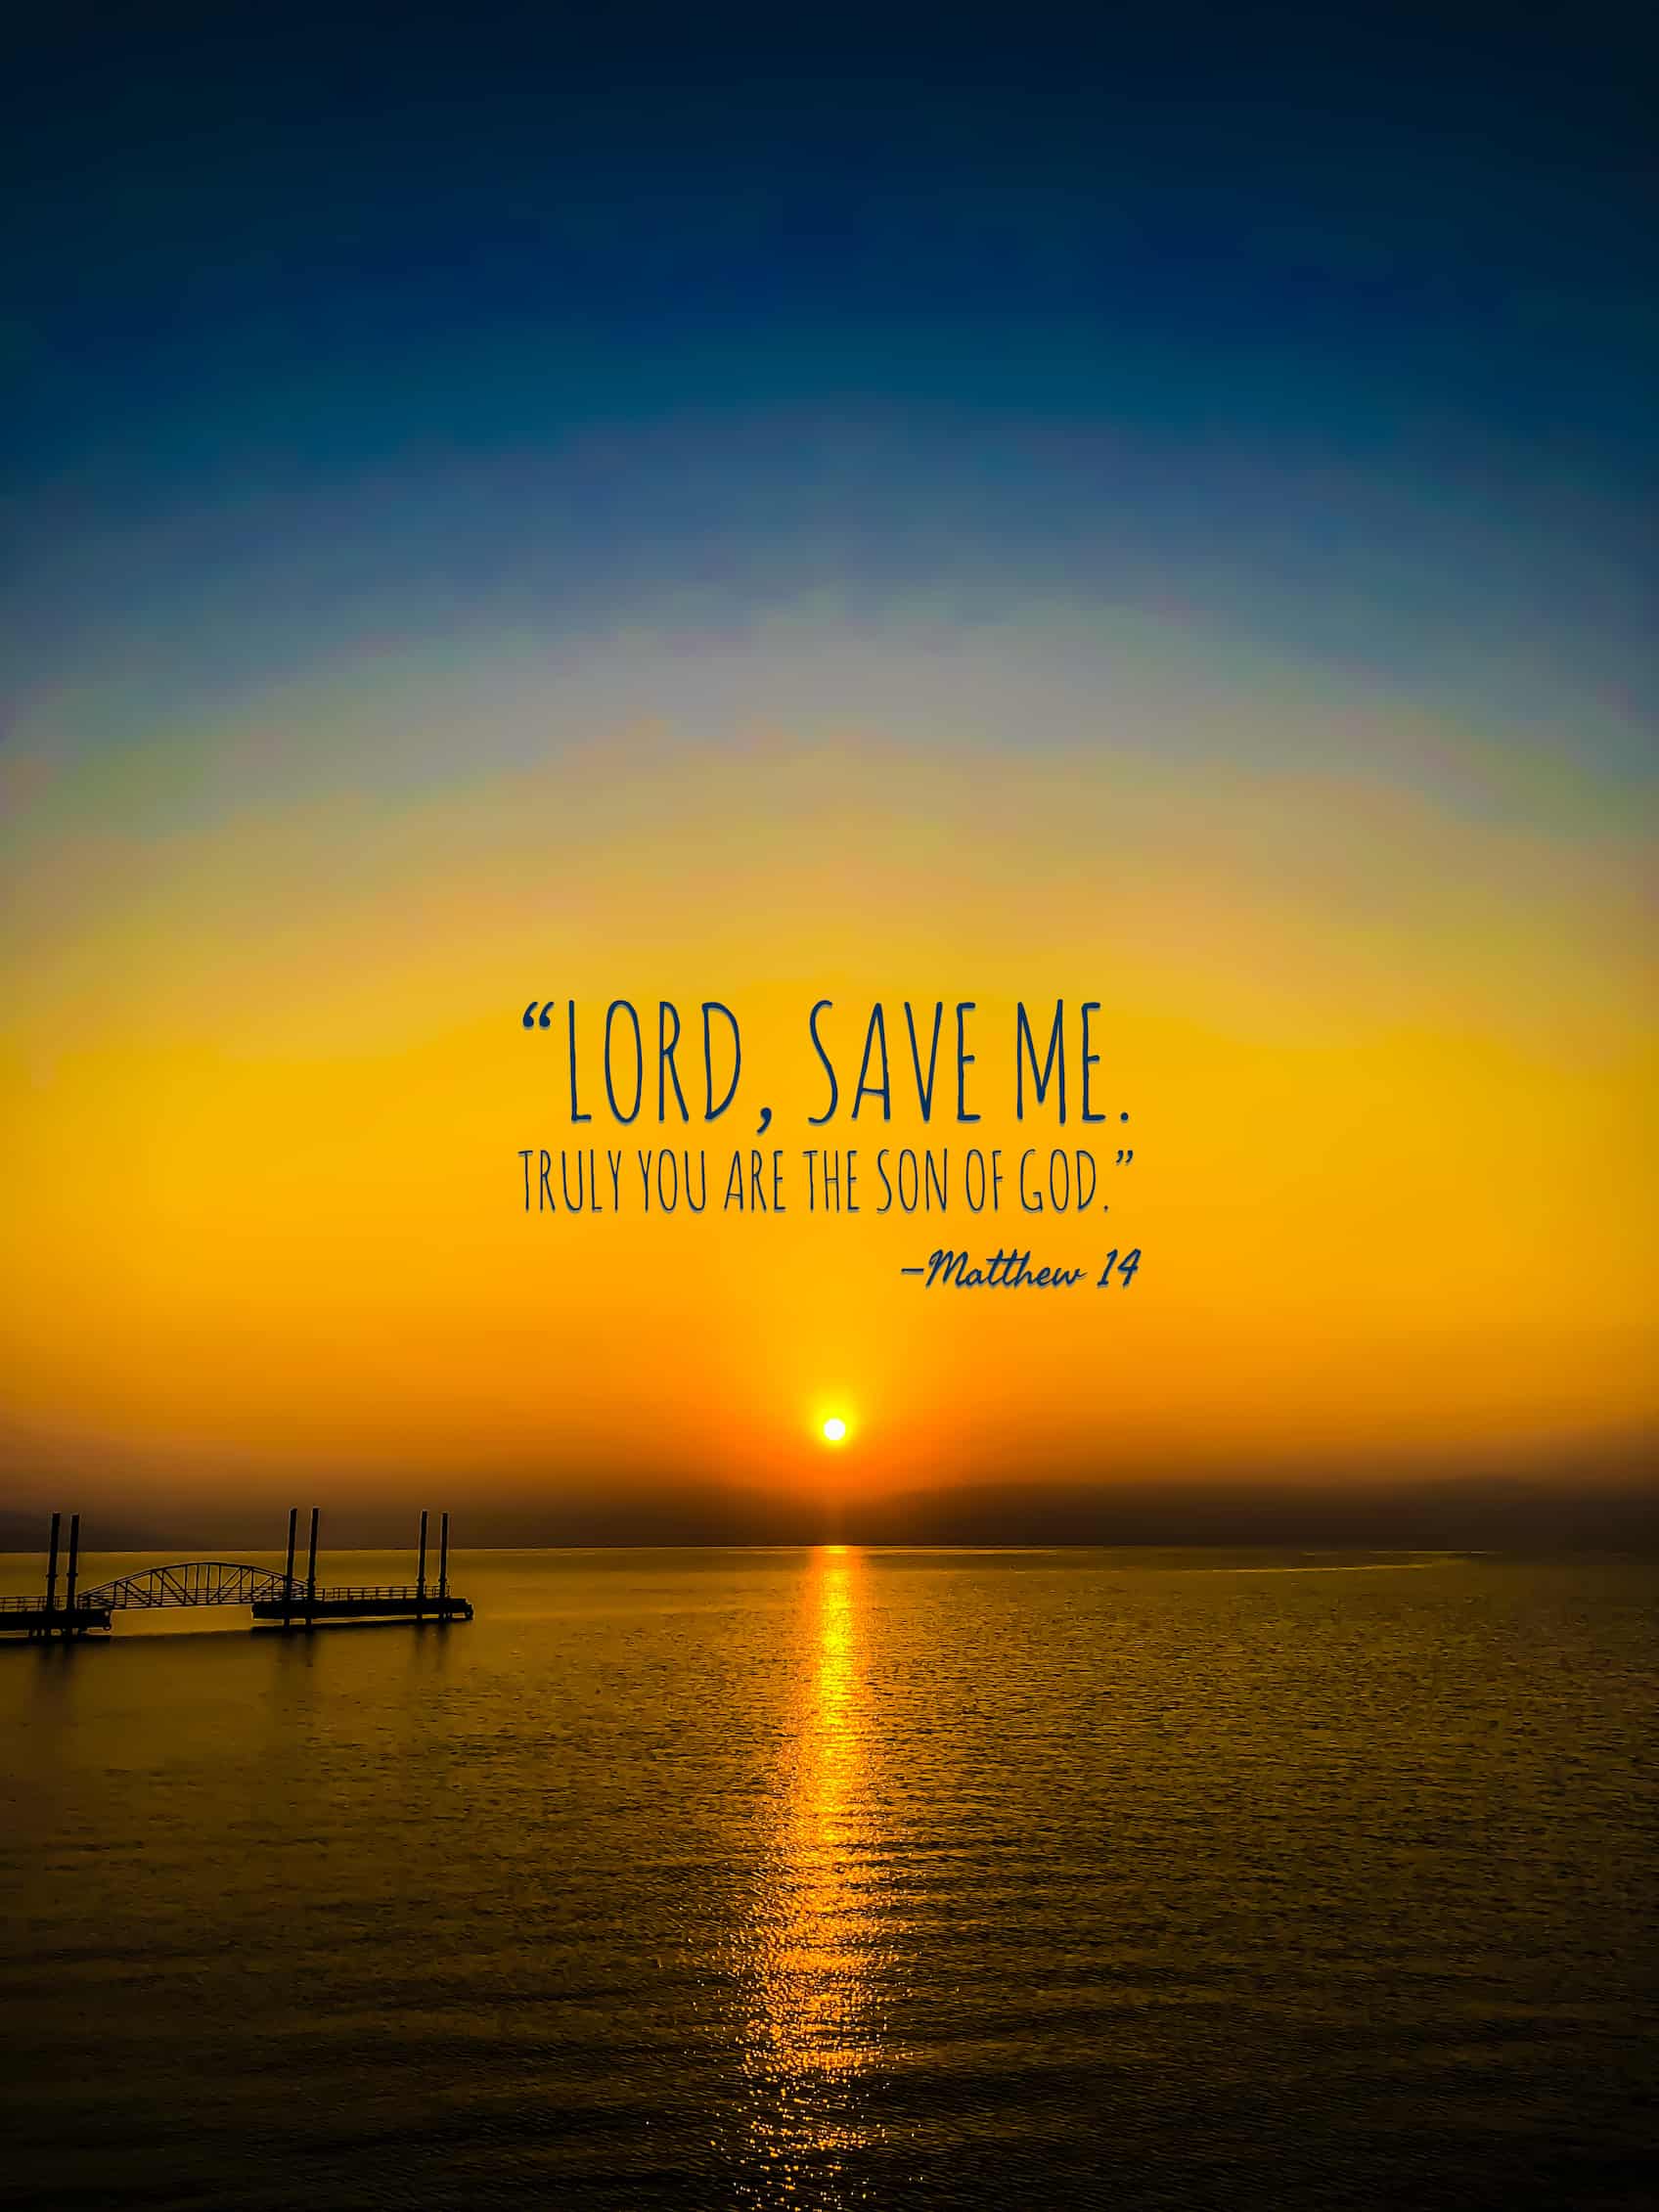 Photo Of The Sea Of Galilee At Sunrise With The Quote